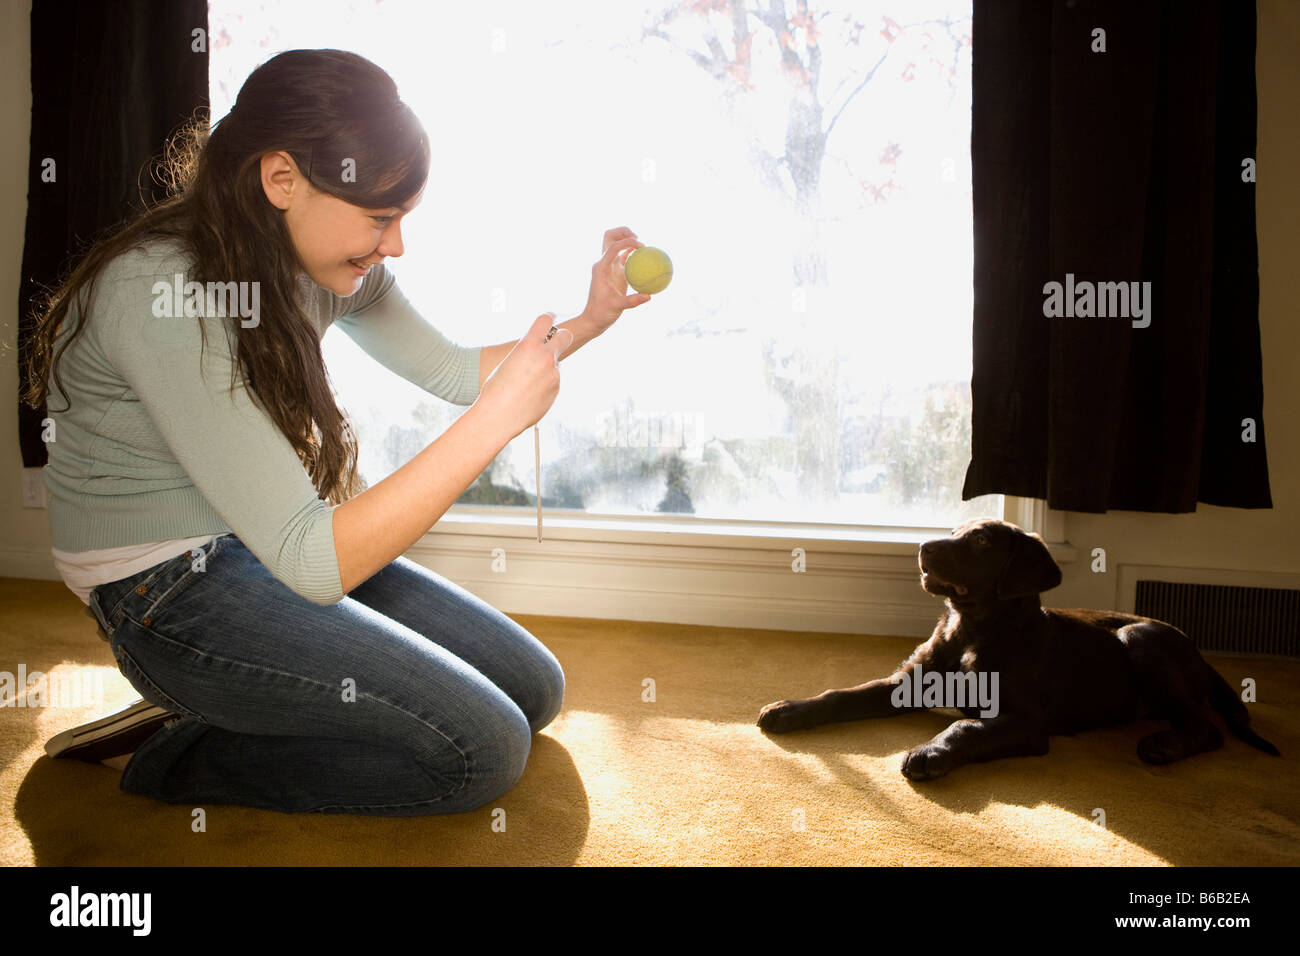 woman playing with dog in living room Stock Photo